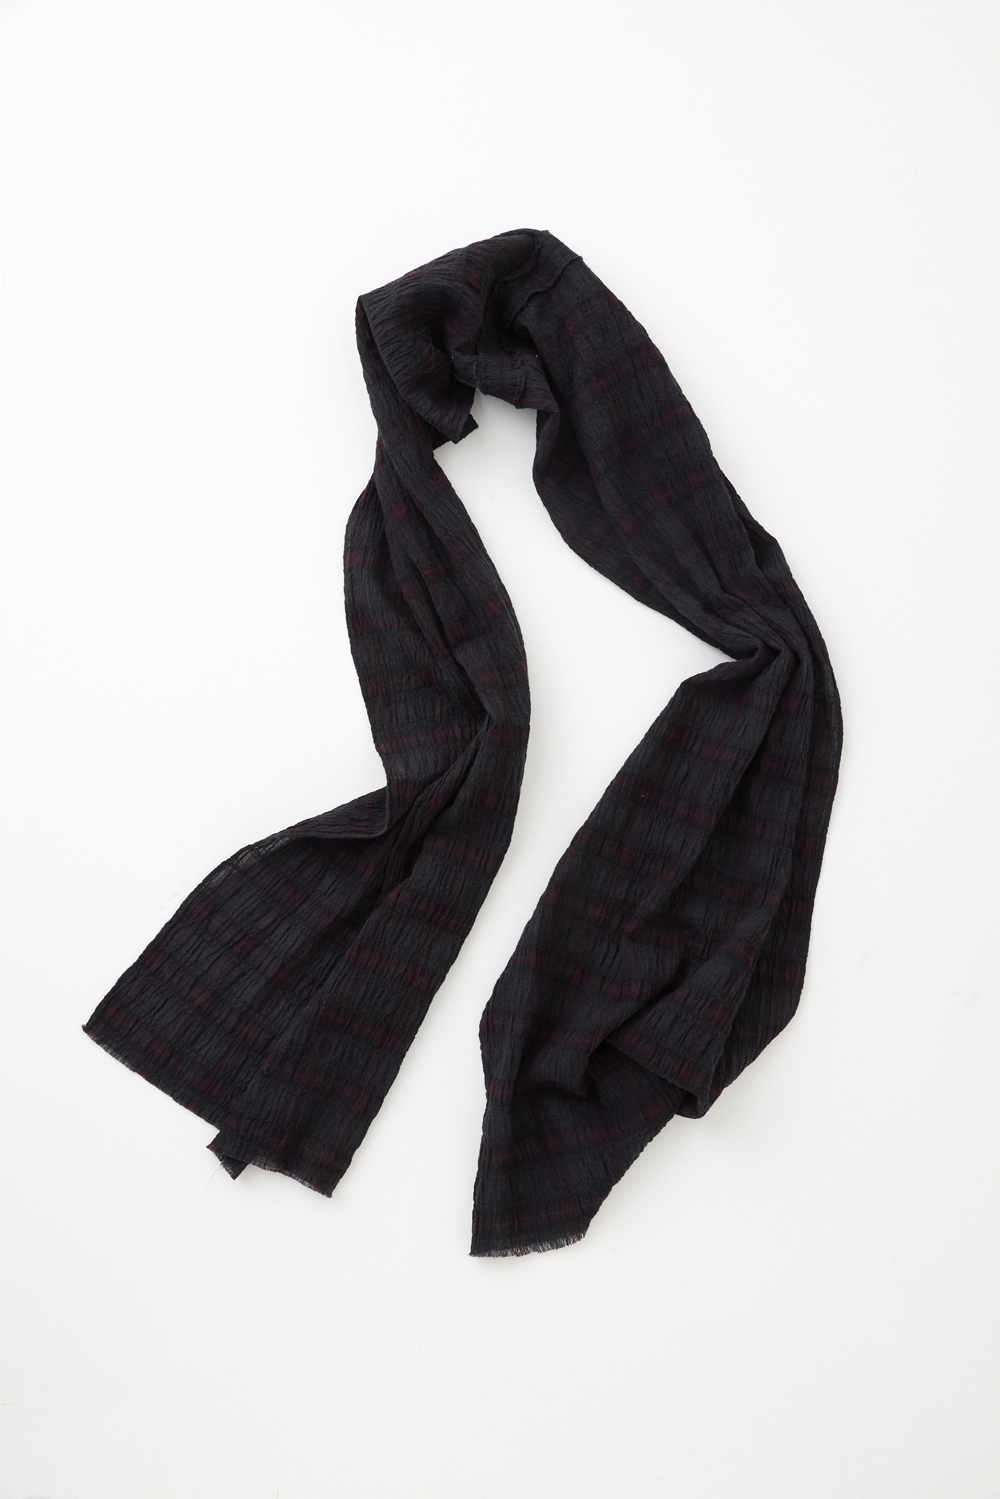 Dyed Cut Off Scarf Black/Red (Restock)